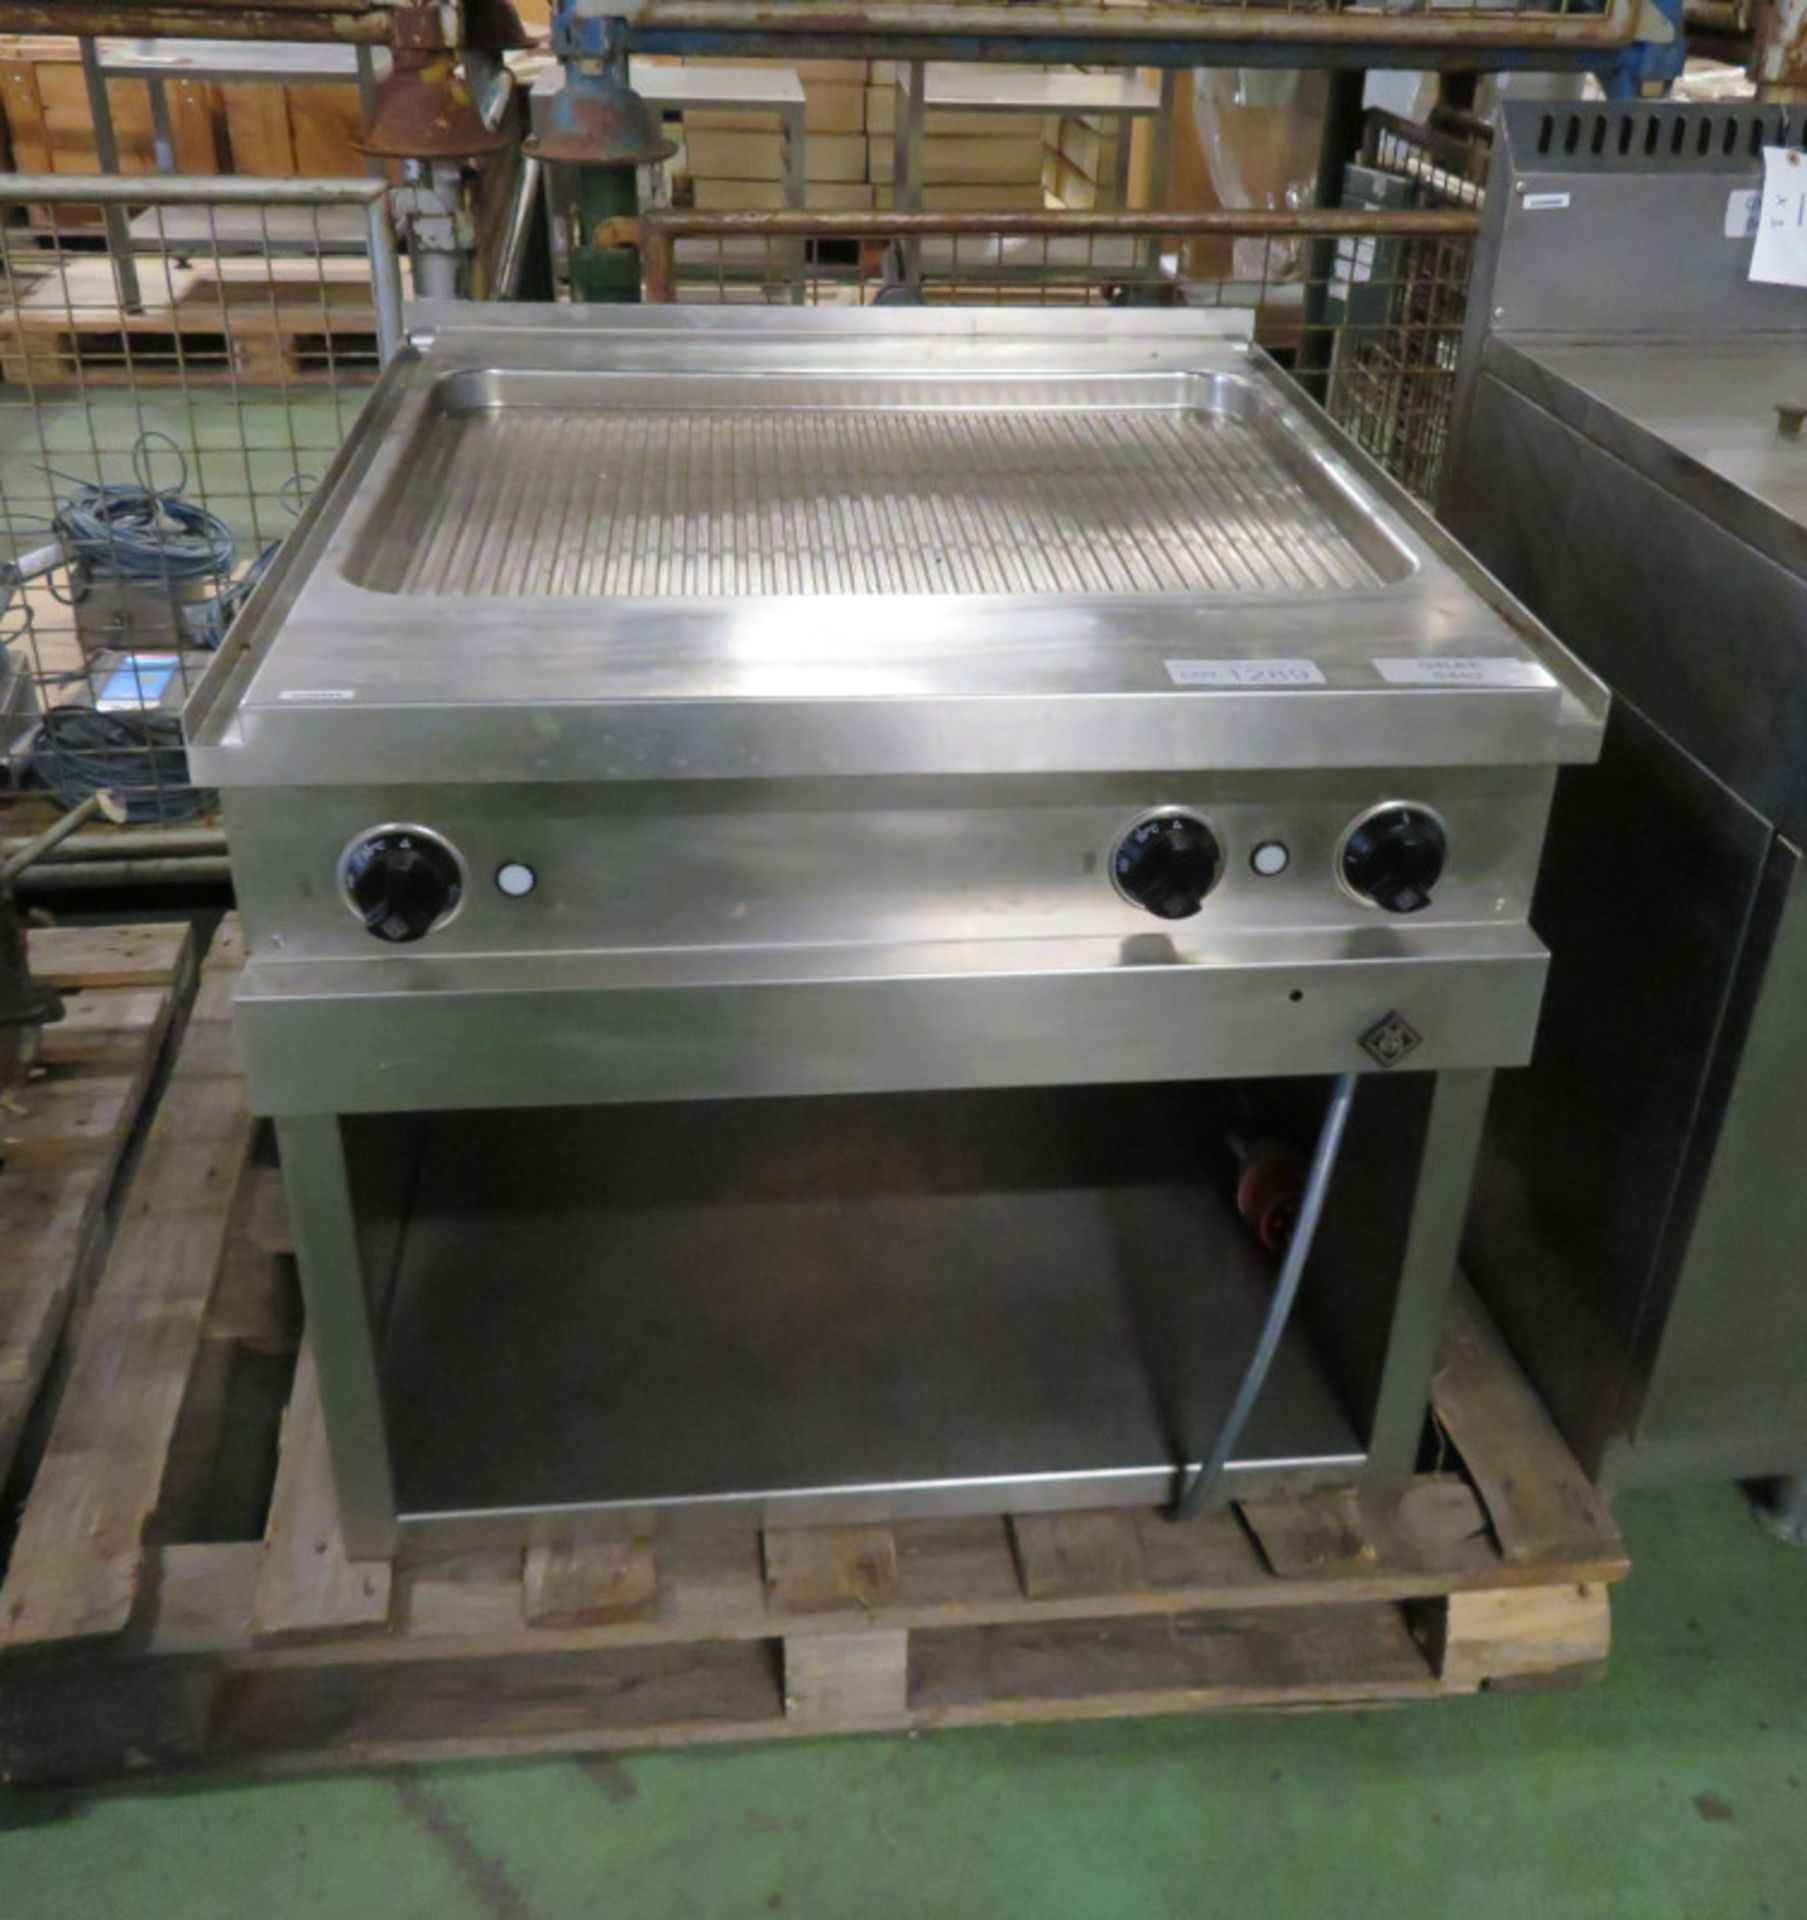 MKN Stainless steel Electric Griddle Plate L 860mm x W 800mm x H 710mm